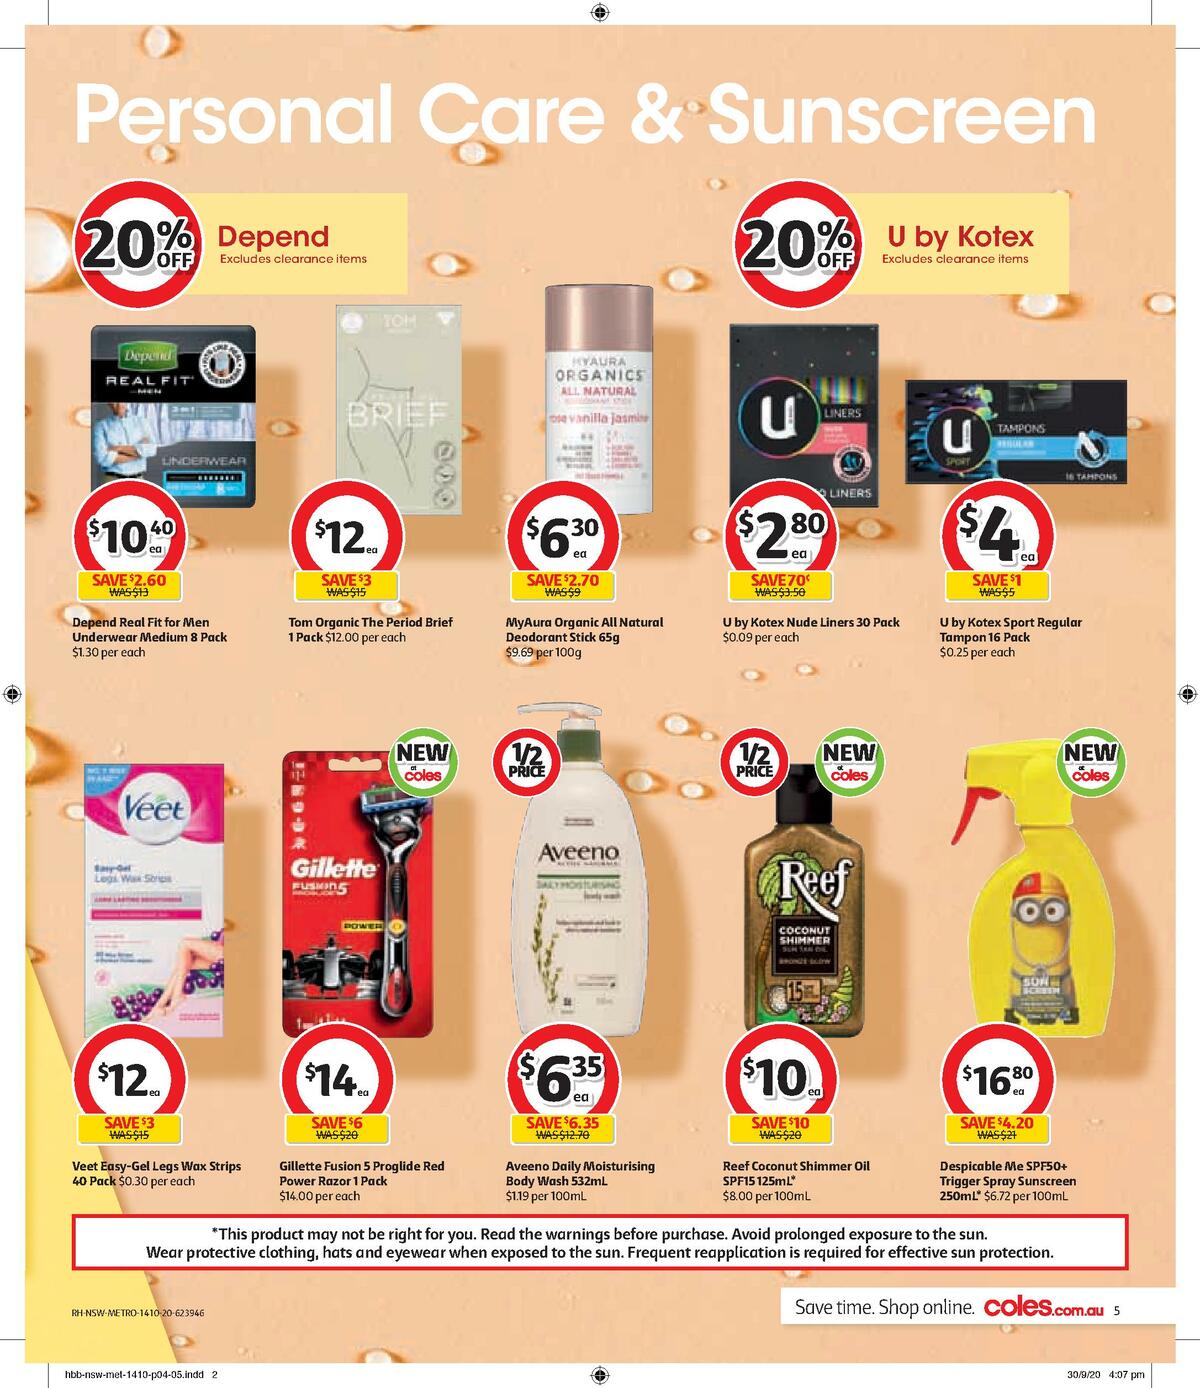 Coles Health & Beauty Catalogues from 14 October